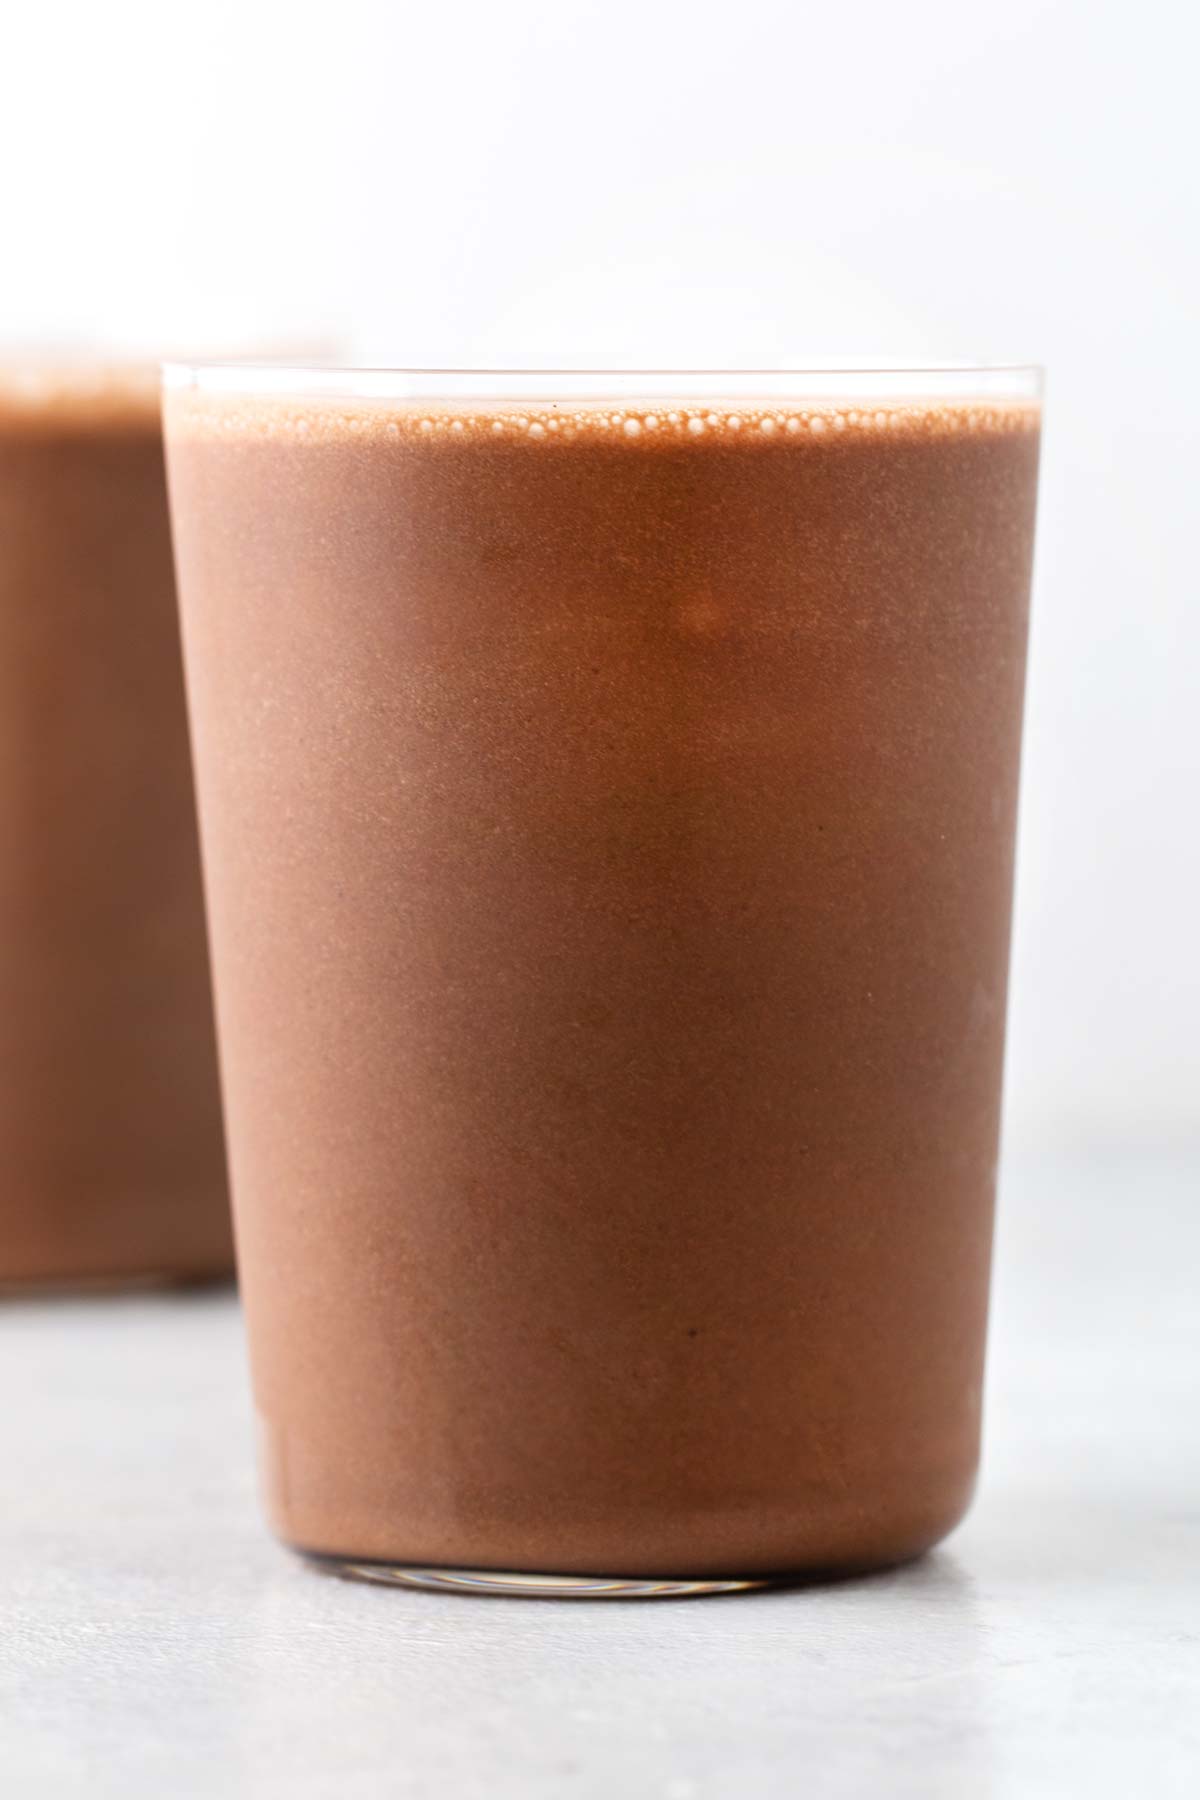 Mocha smoothie in a glass.